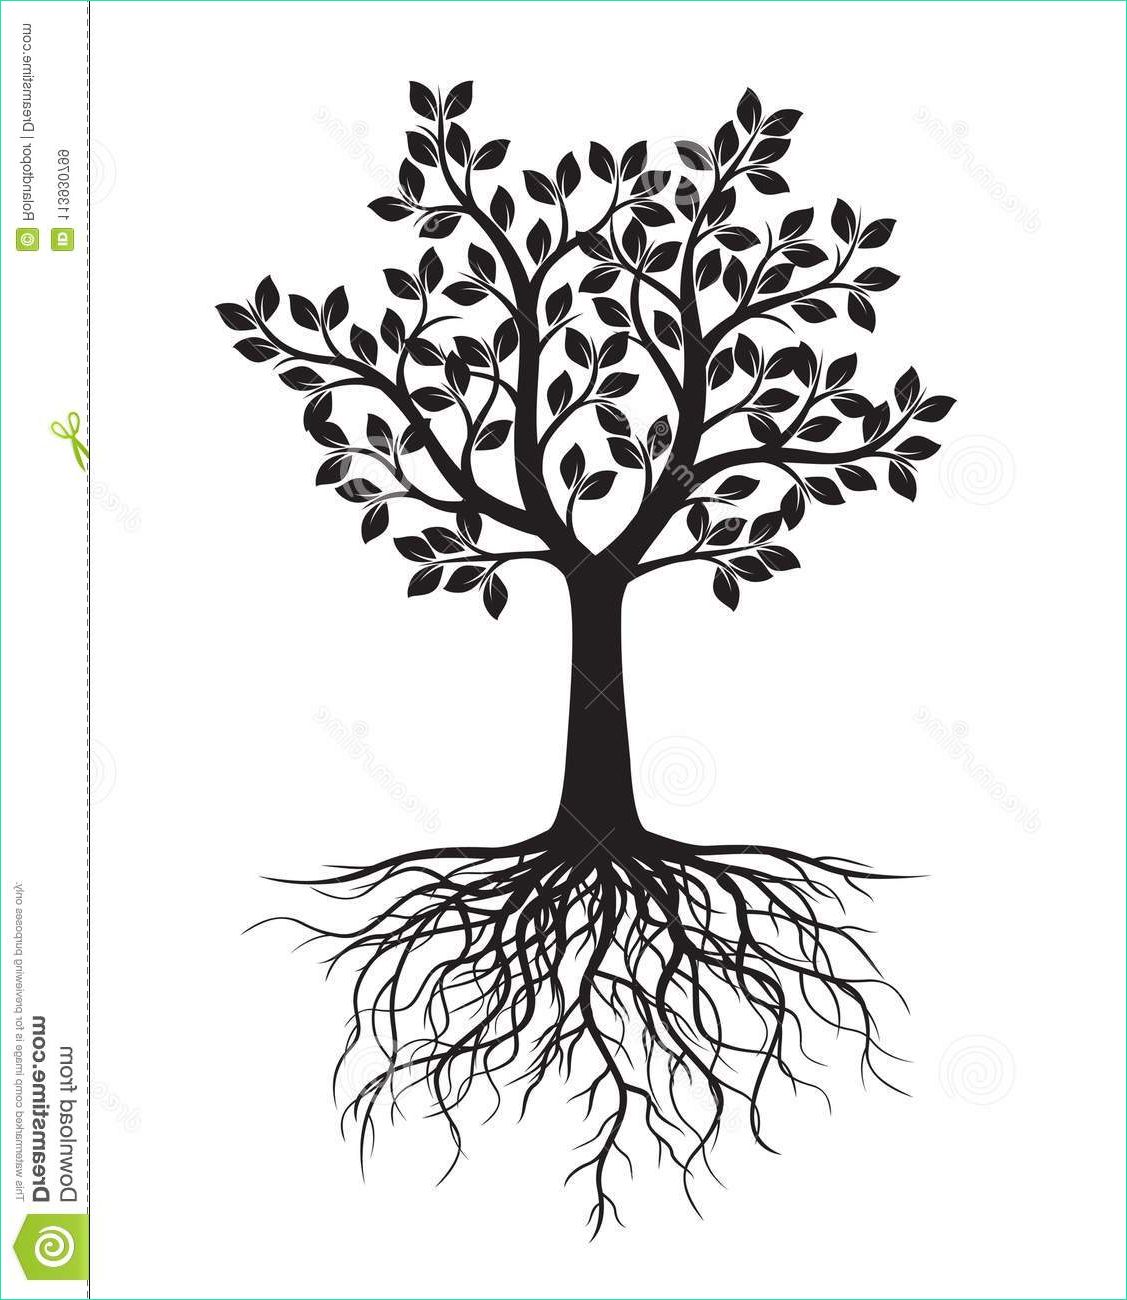 Dessin Racines Arbre Bestof Image Black Tree with Leaves and Roots Stock Illustration